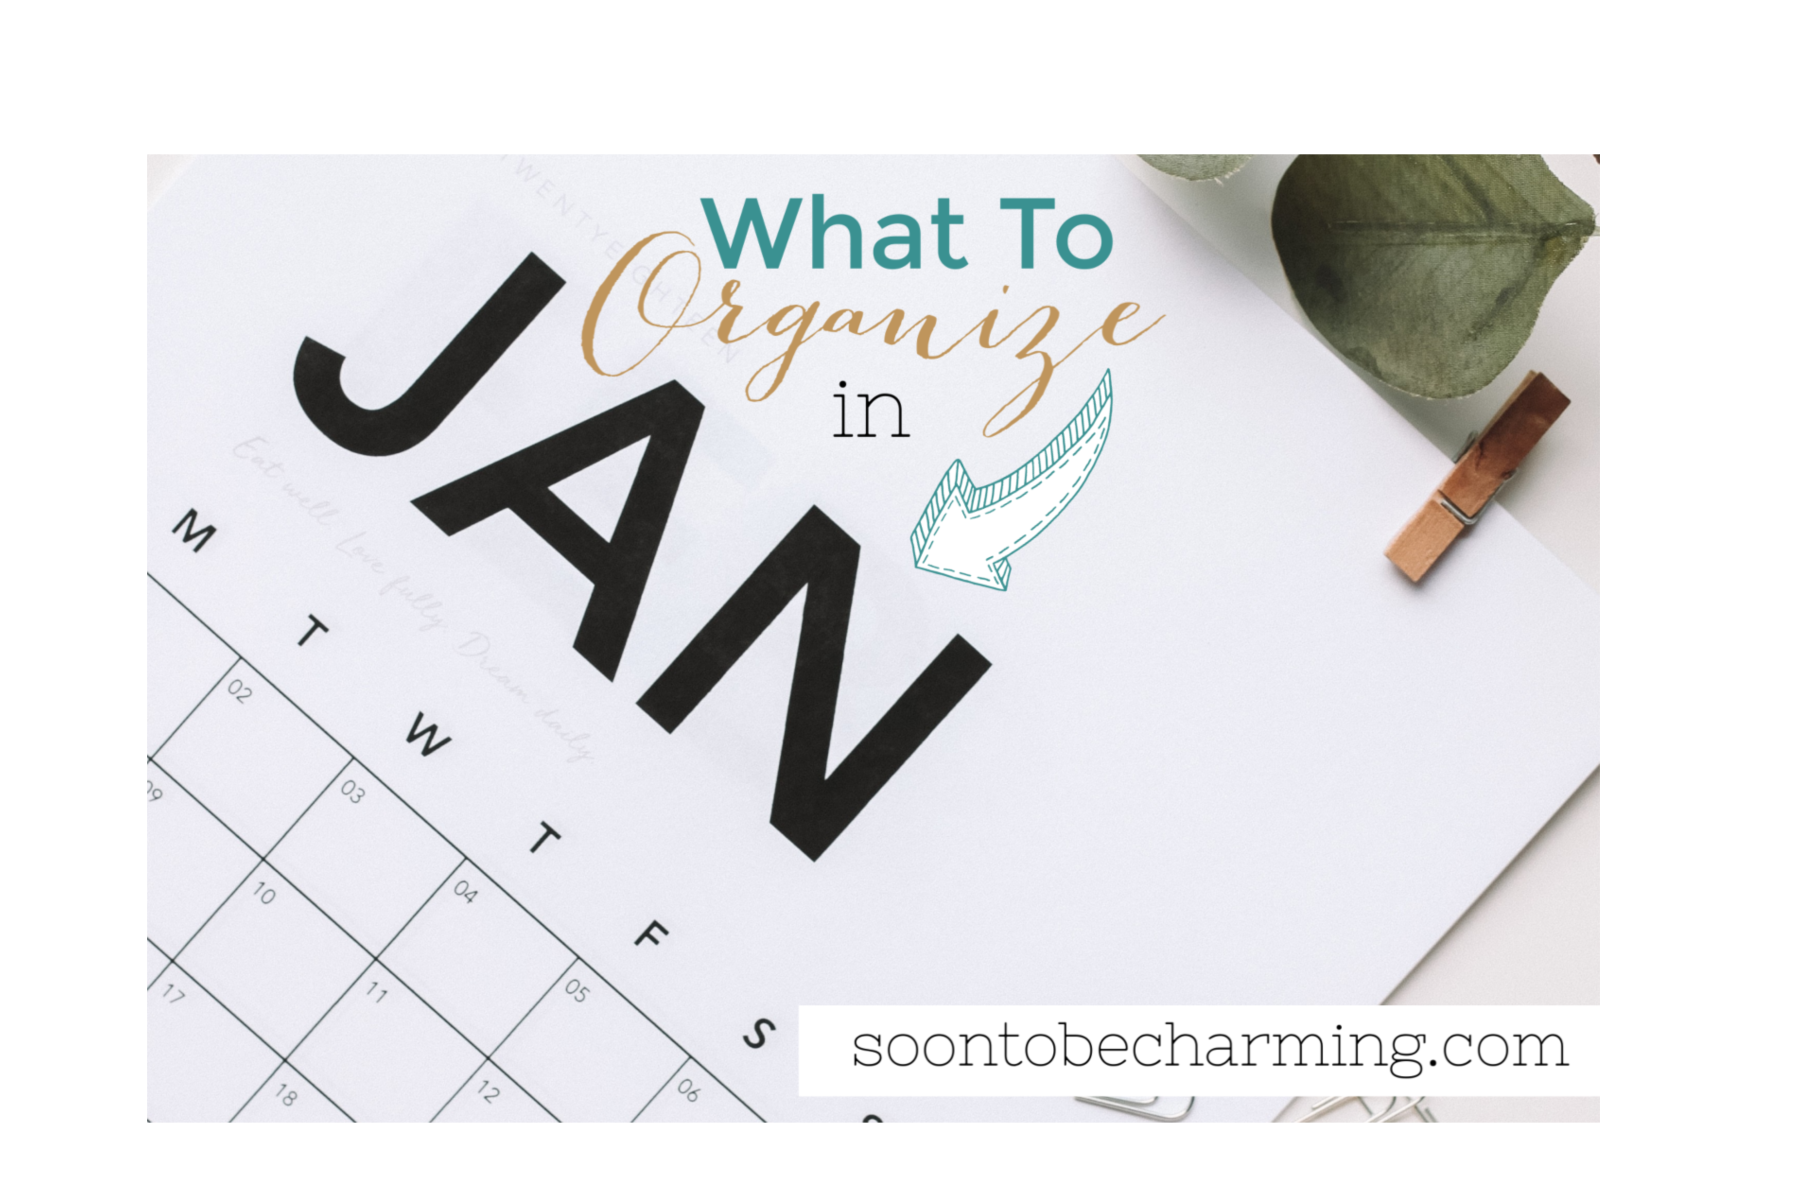 What To Organize in January